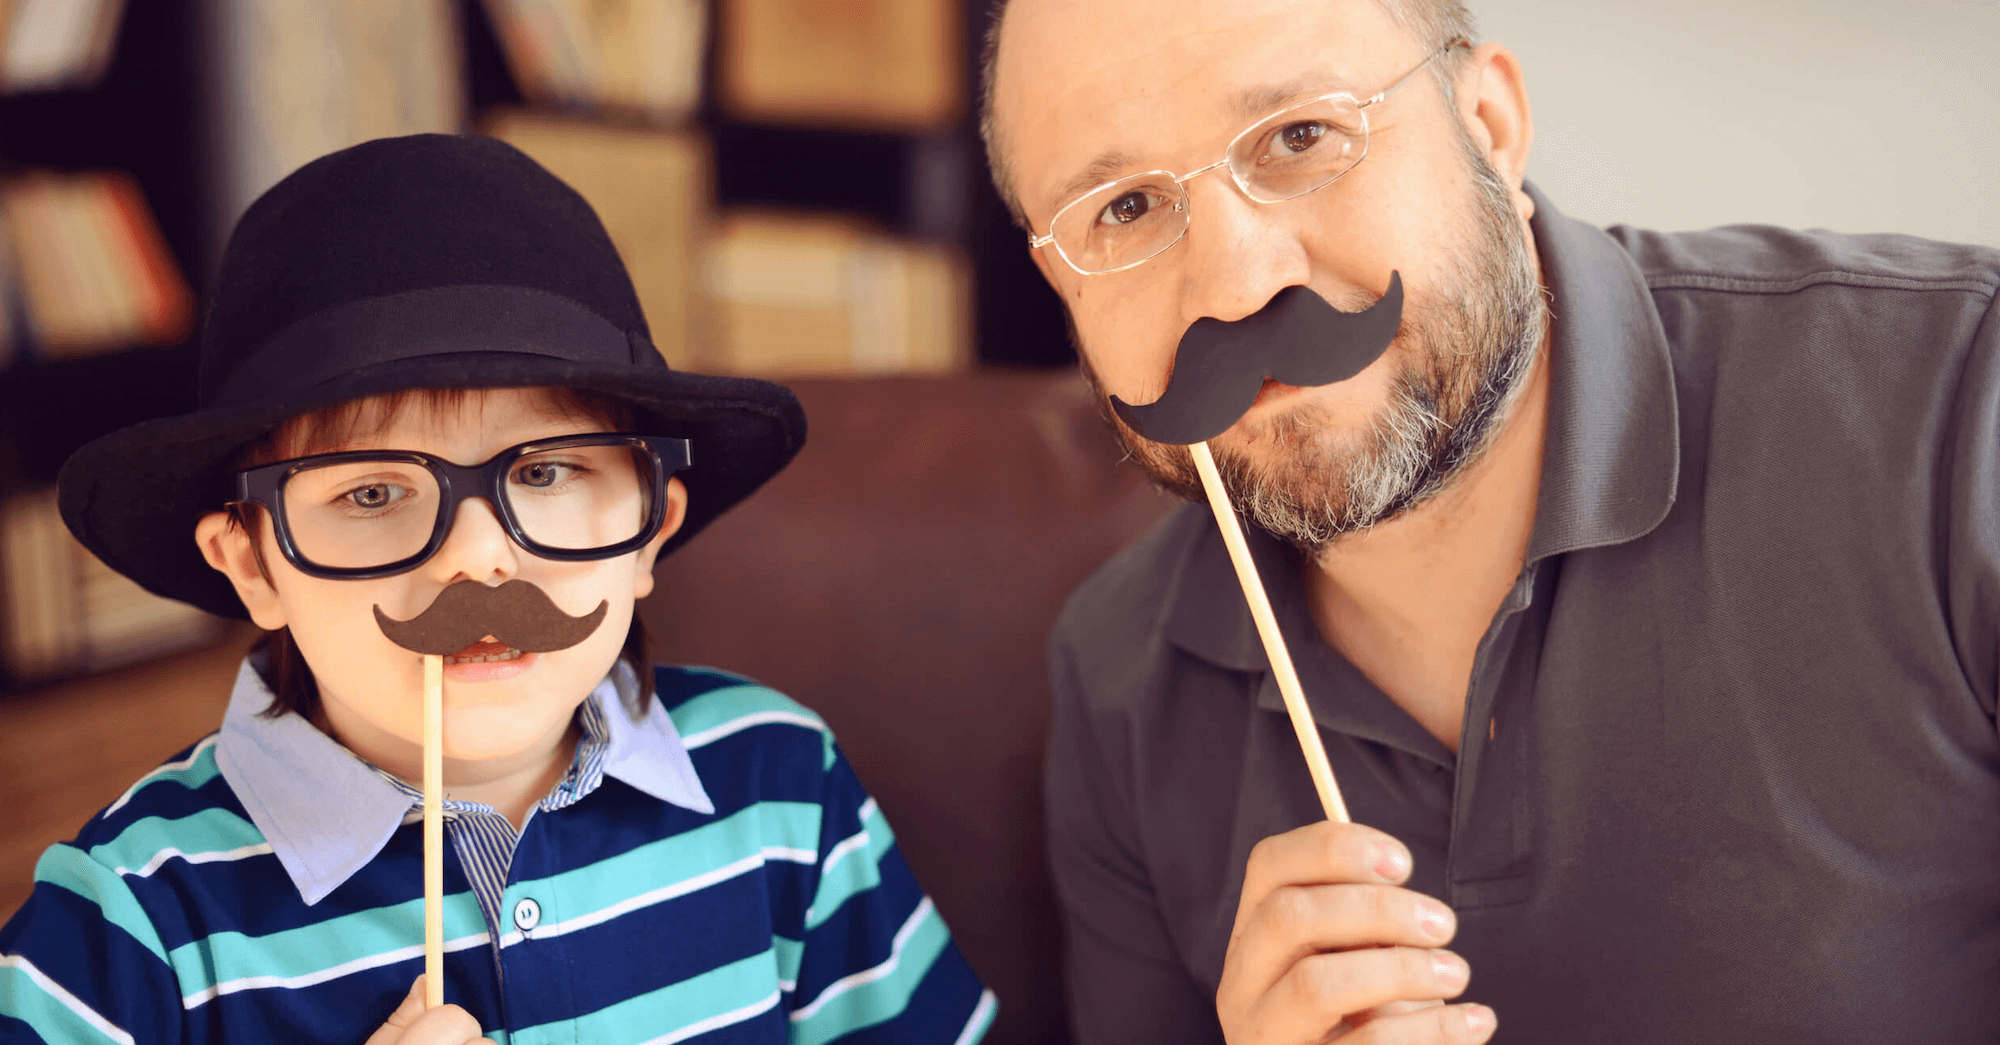 Man and boy with mustache disguises